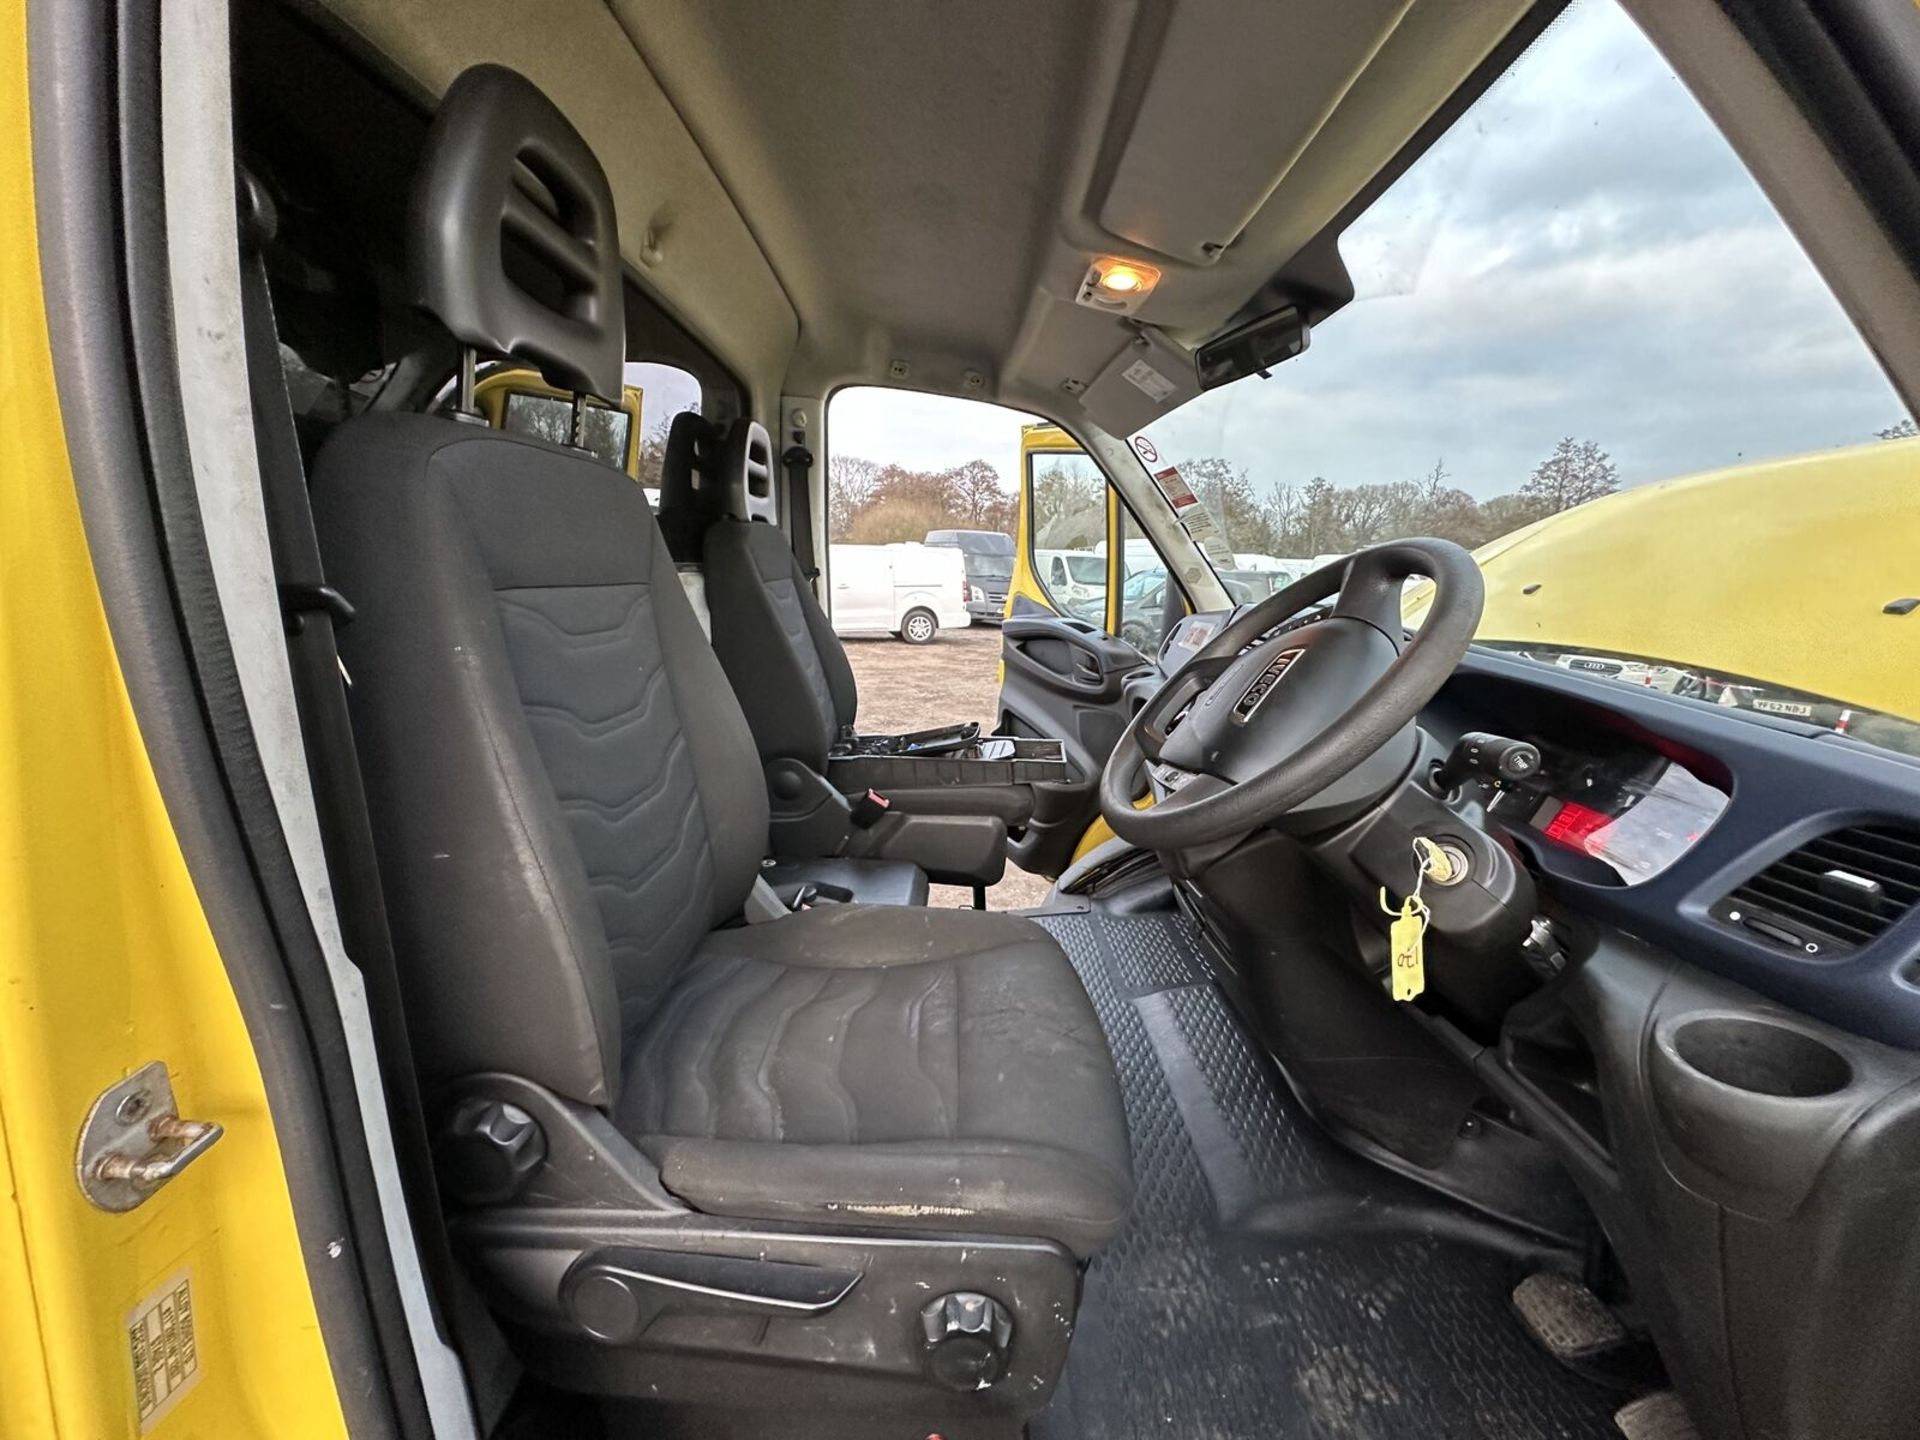 YELLOW LUTON WORKHORSE: 2019 IVECO DAILY 35S12 DIESEL SPARES OR REPAIRS - Image 10 of 15